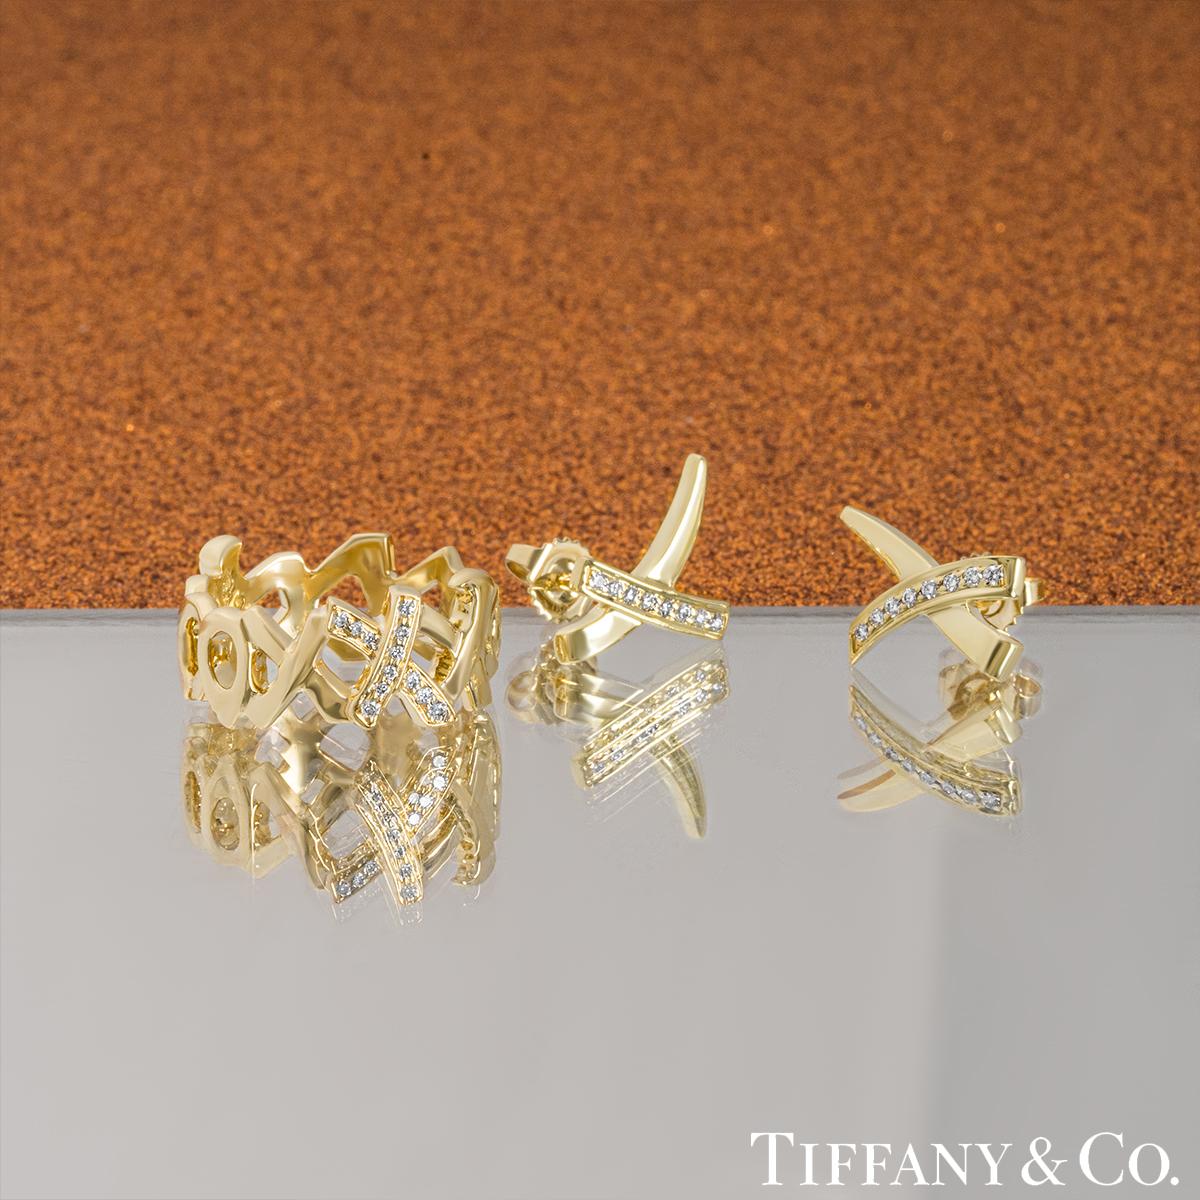 Tiffany & Co. Yellow Gold Diamond Graffiti X Earrings & Ring Suite For Sale 5